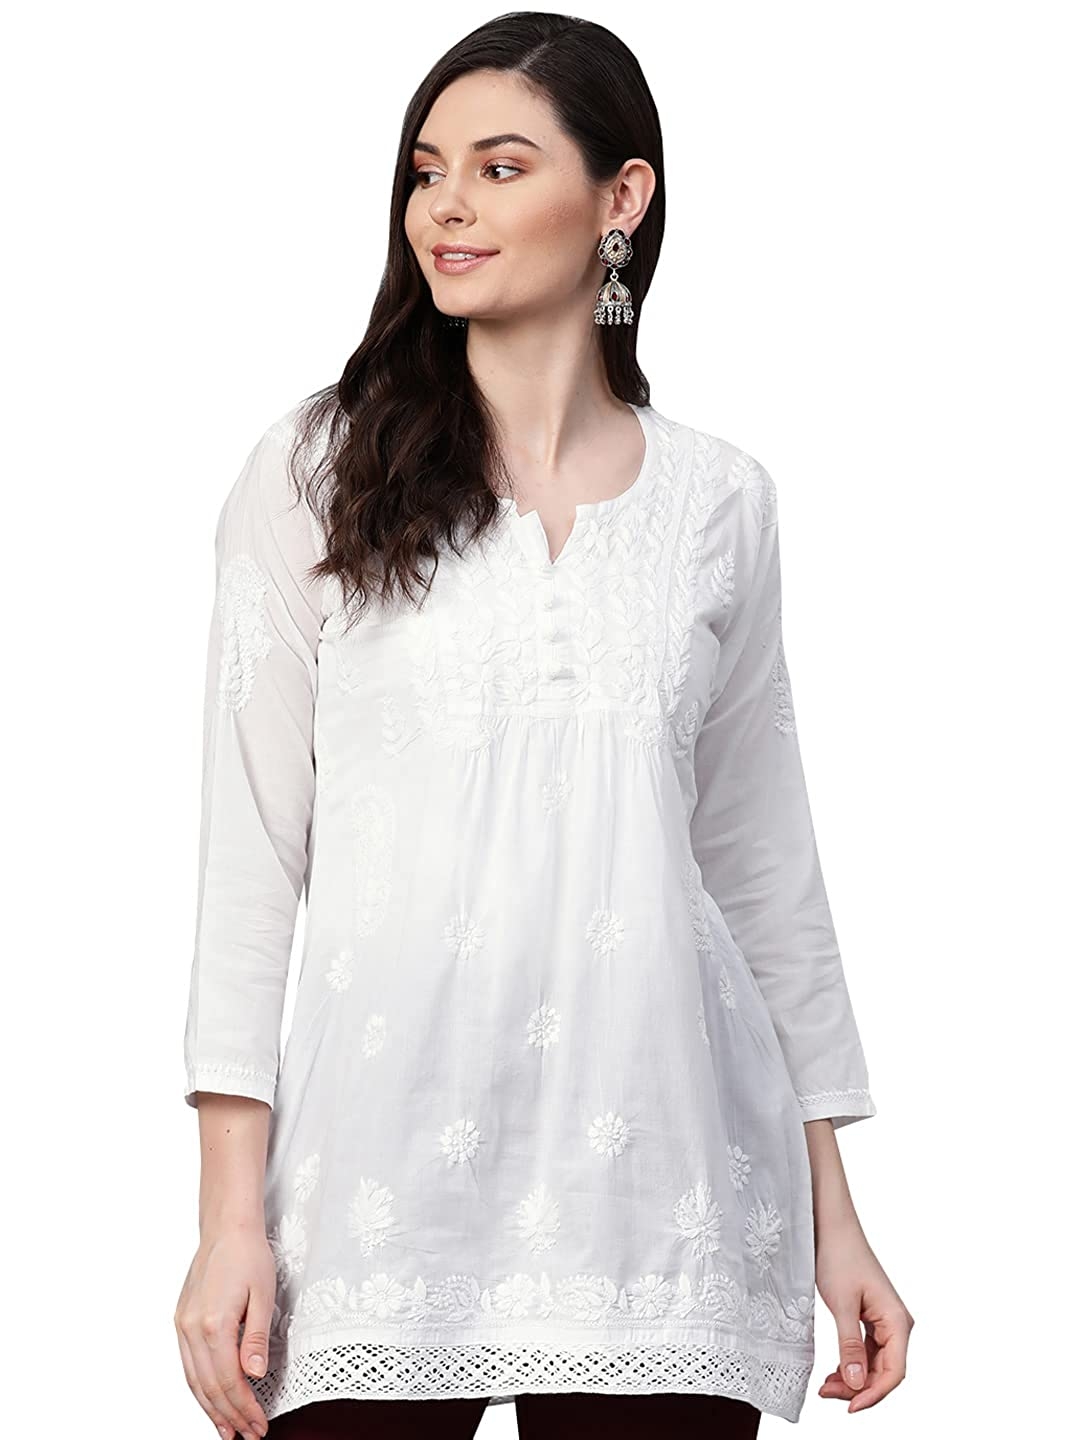 Buy MAGHMAA Chikankari Cotton Kurti's for Women Summer Traditional Lucknowi  Style Dress White Kurta and Pant Set-Large at Amazon.in